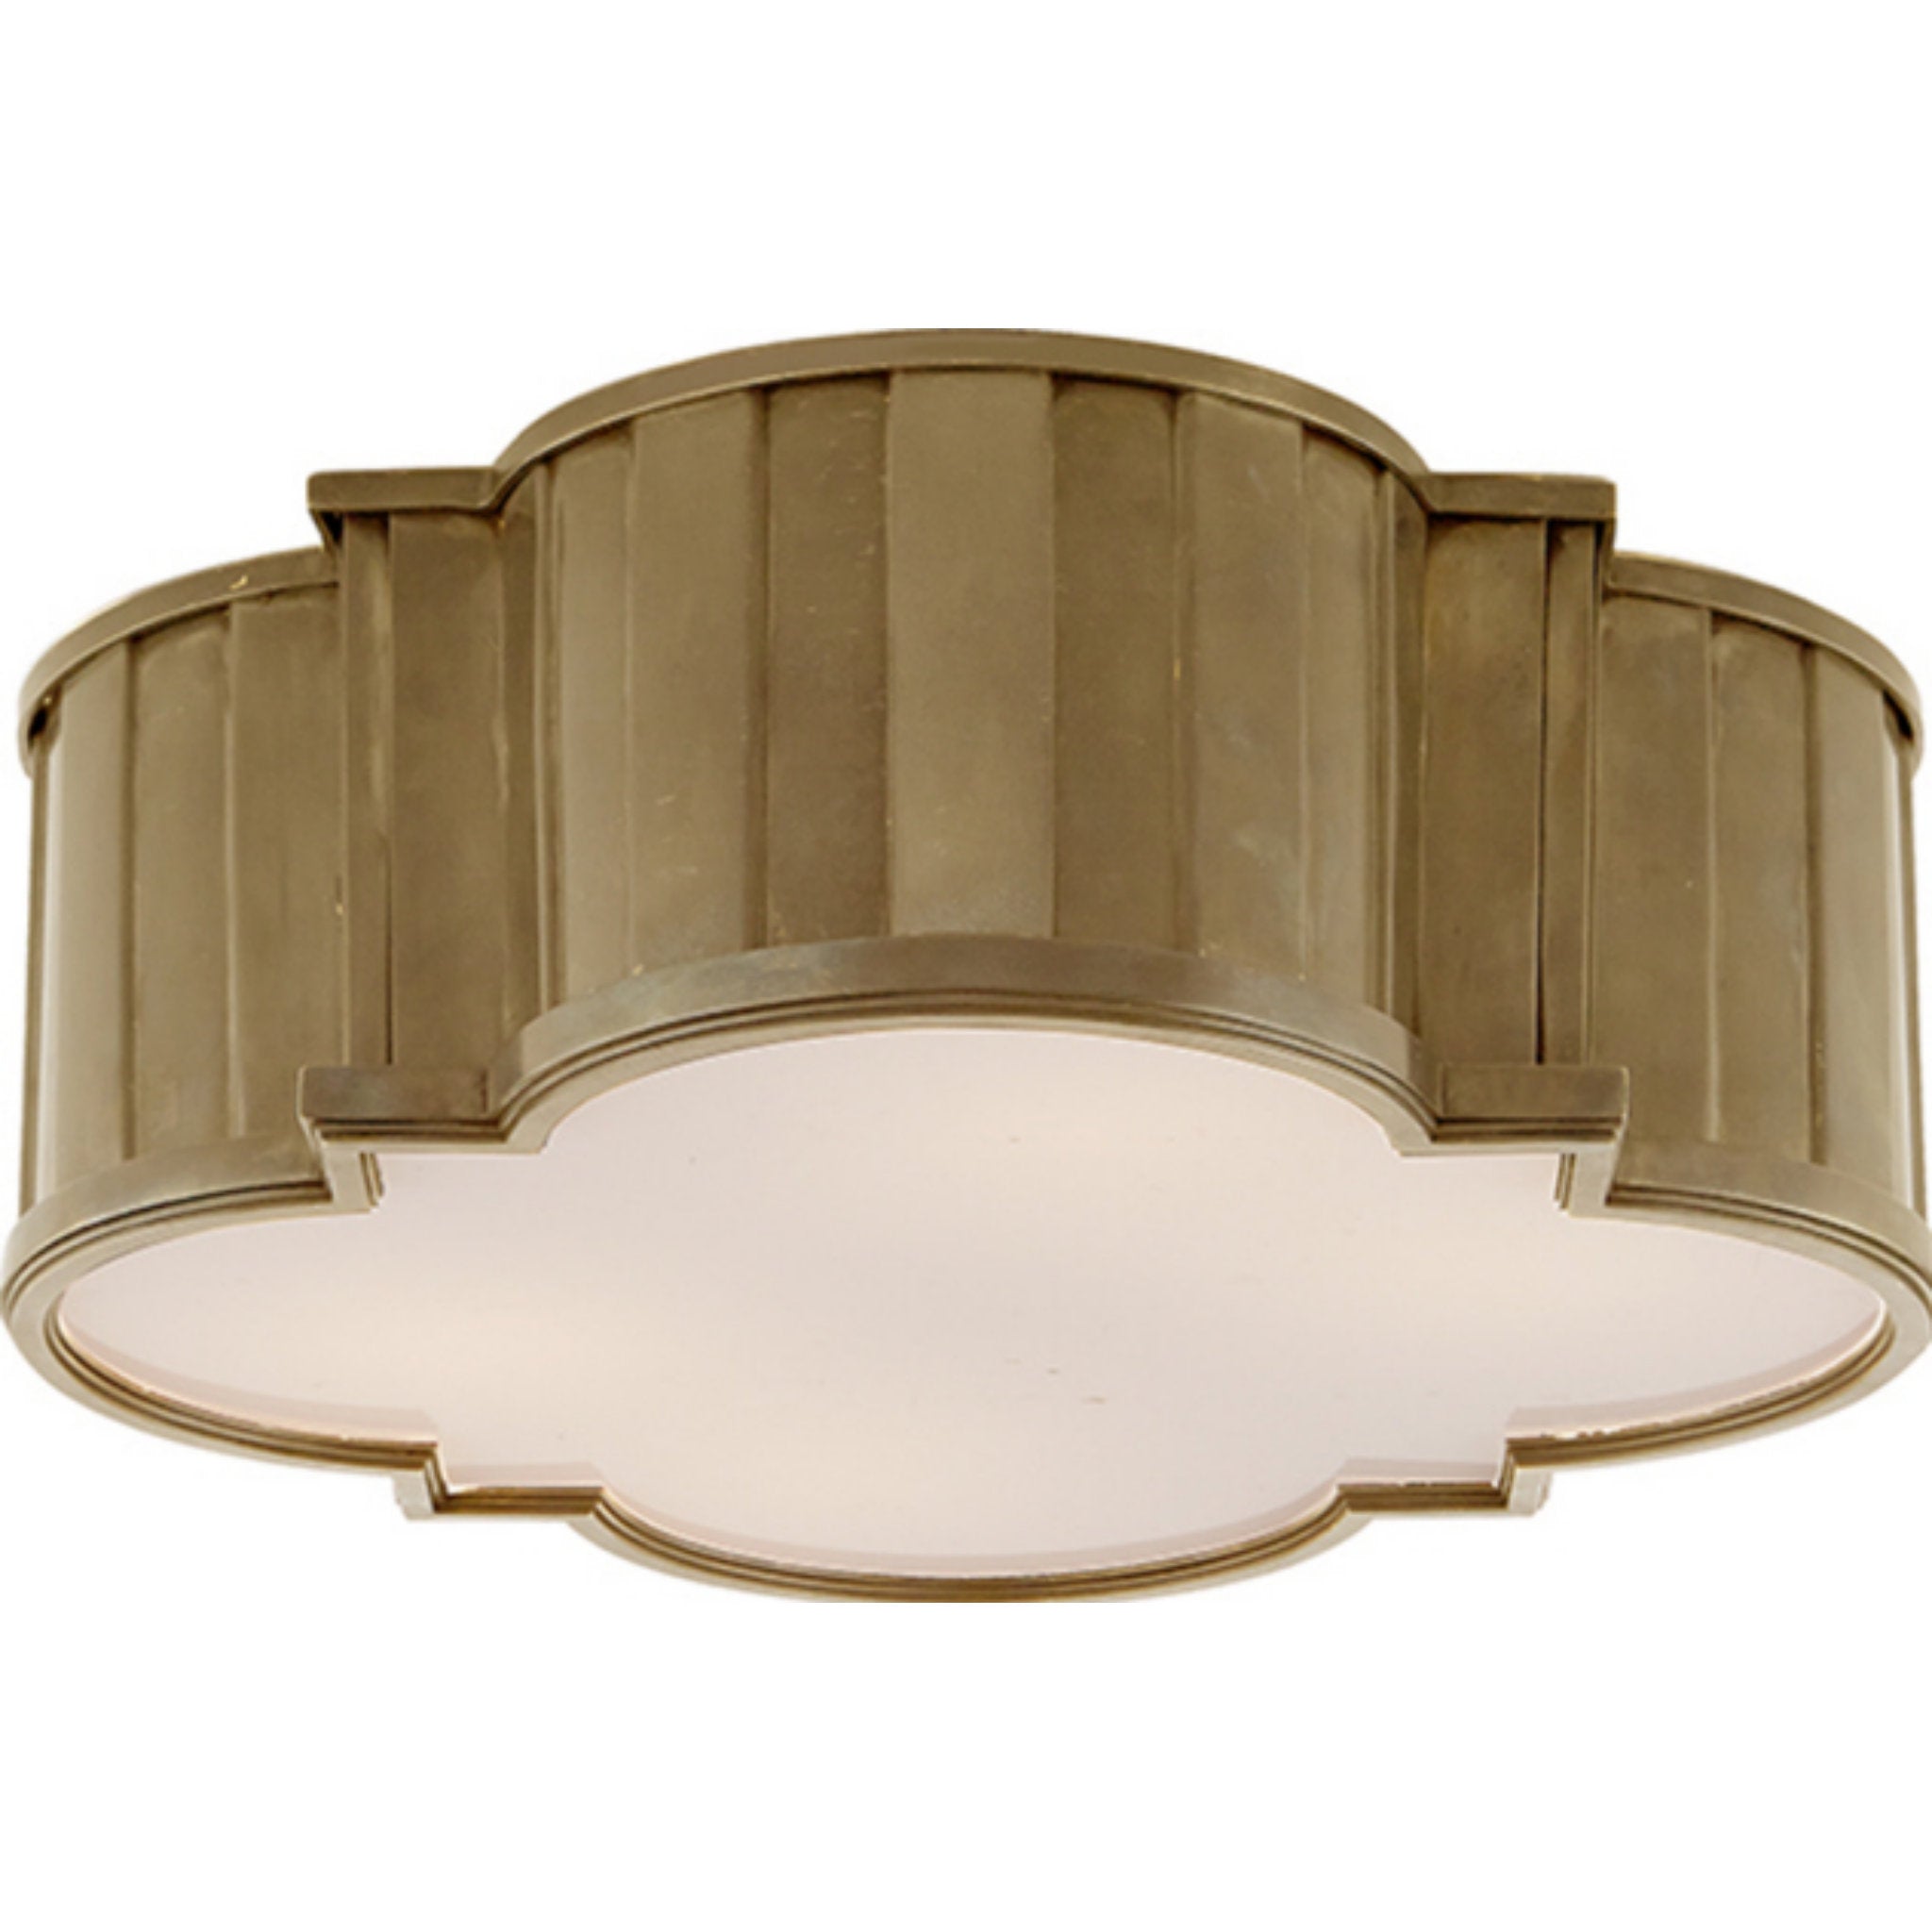 Thomas O'Brien Tilden Large Flush Mount in Hand-Rubbed Antique Brass with White Glass